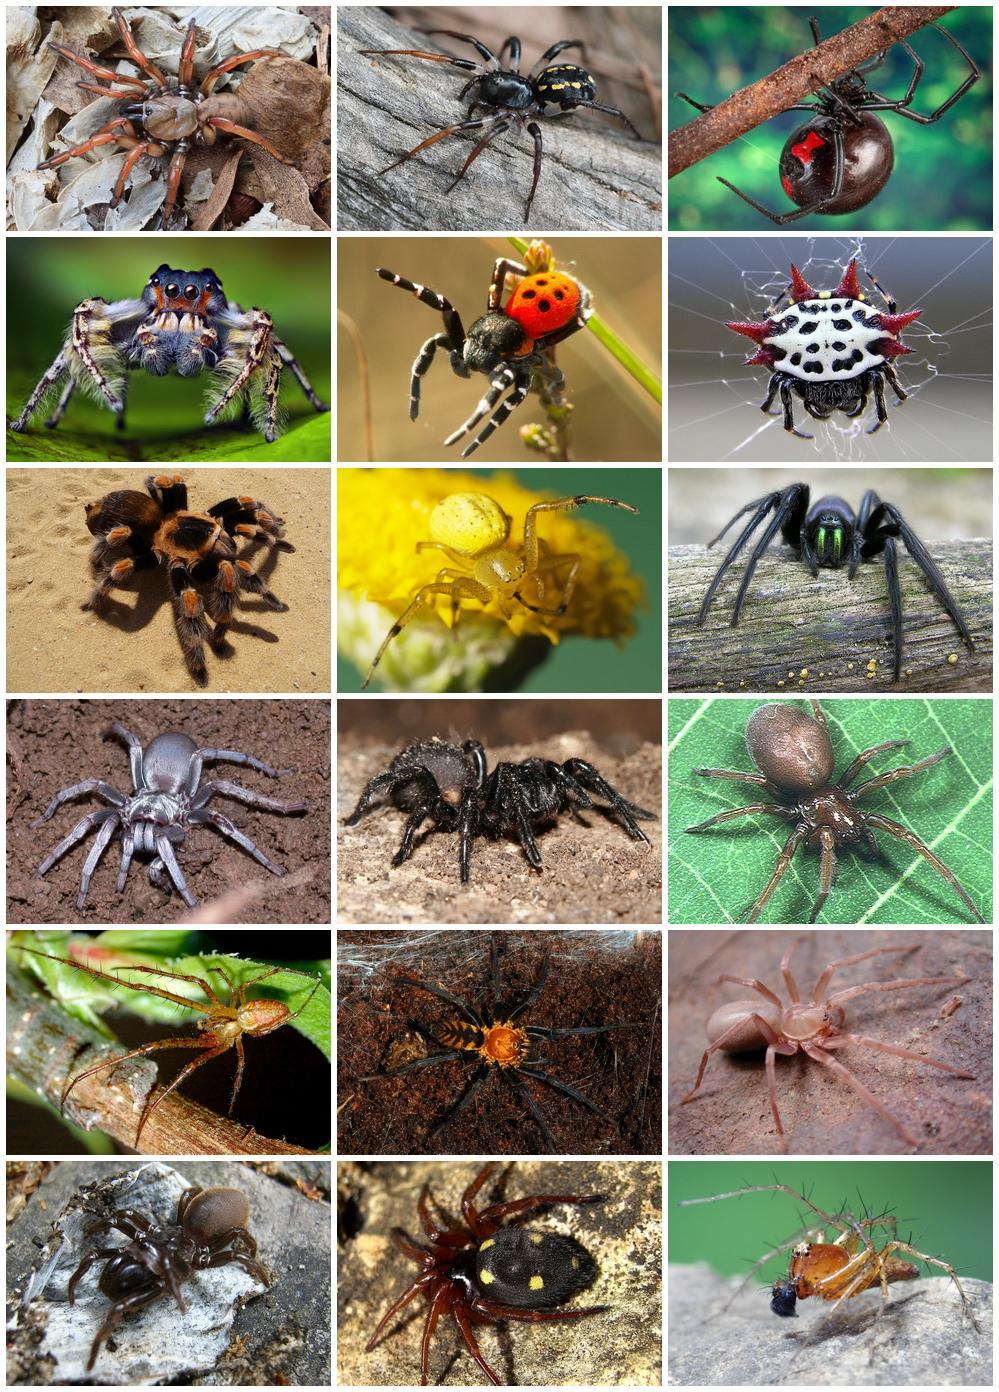 Many spiders spin silk others are ambush predators or spin a funnel and wait for prey to